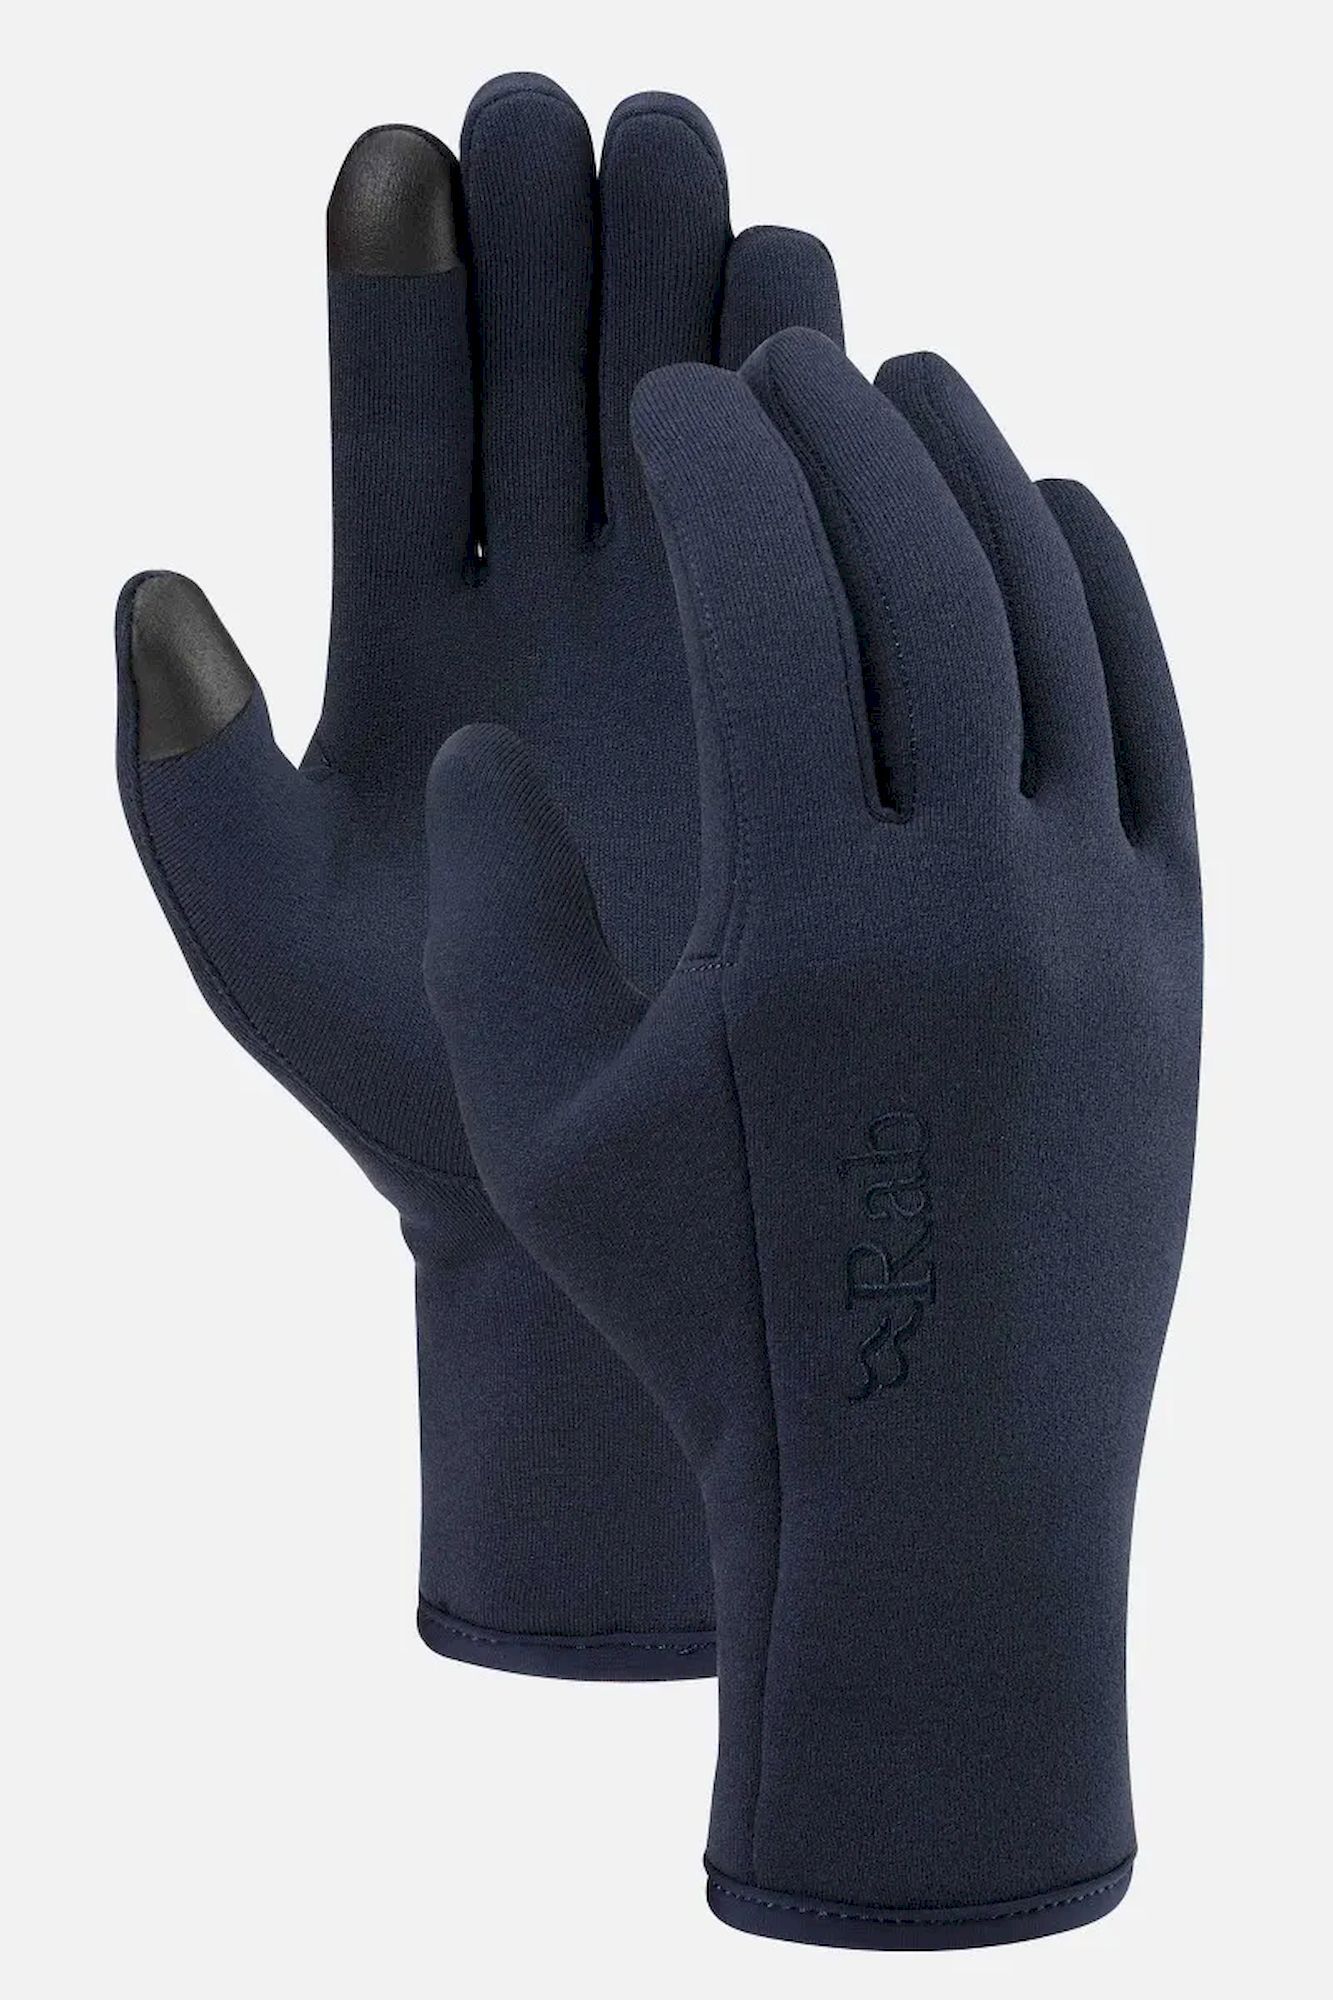 Rab Power Stretch Contact Gloves - Guantes - Hombre